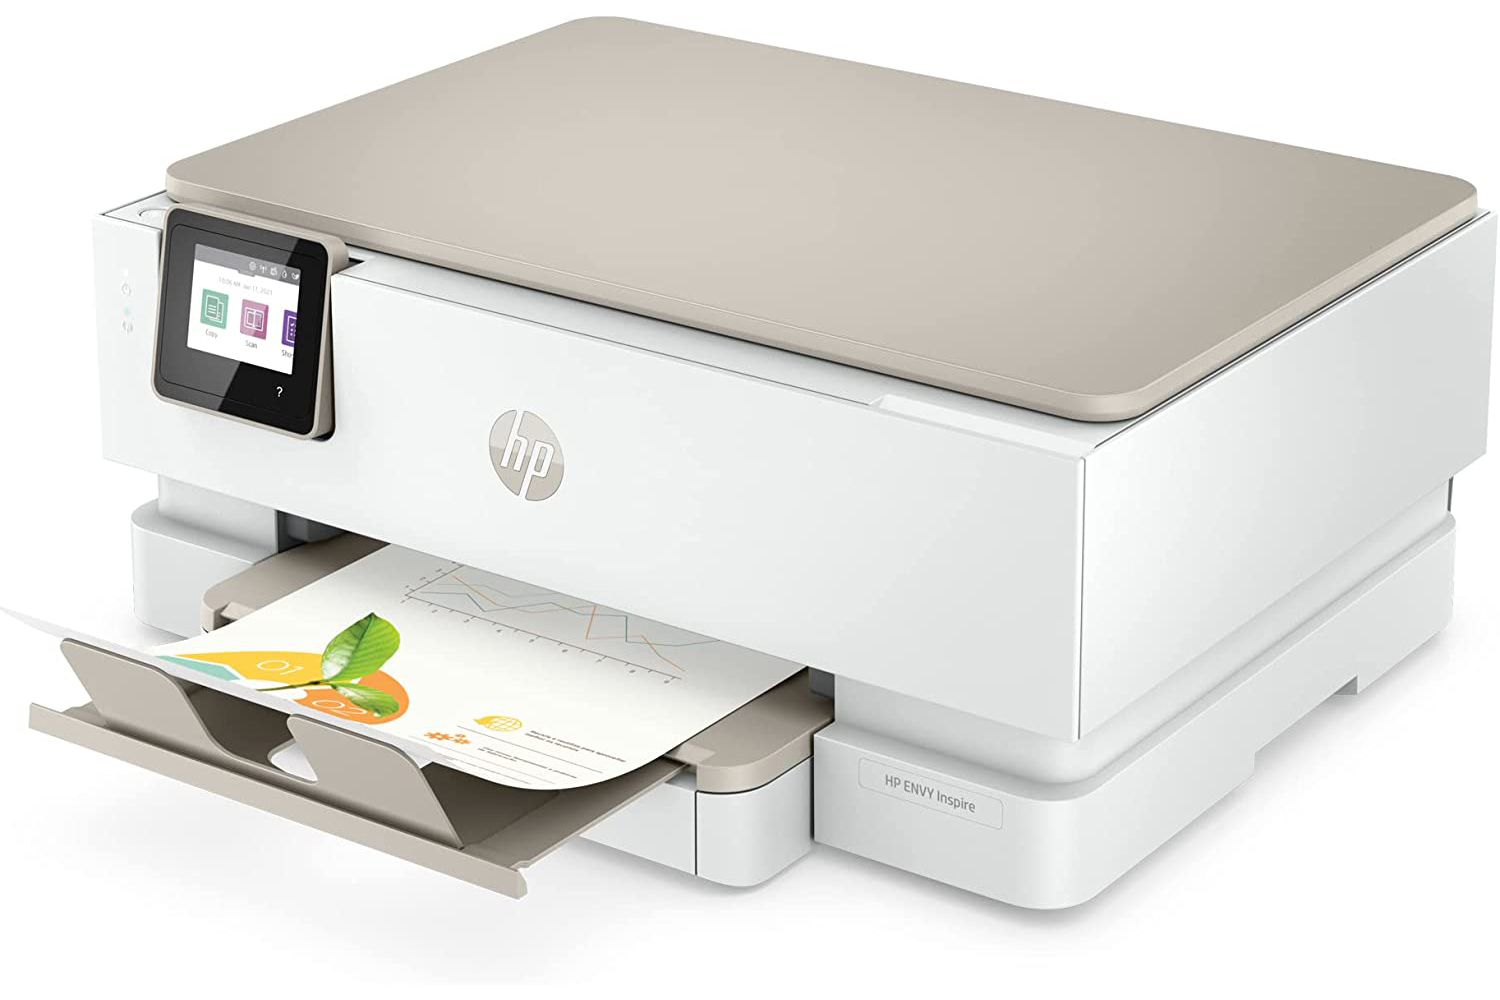 The HP Envy Inspire 7255e All-in-One Printer.